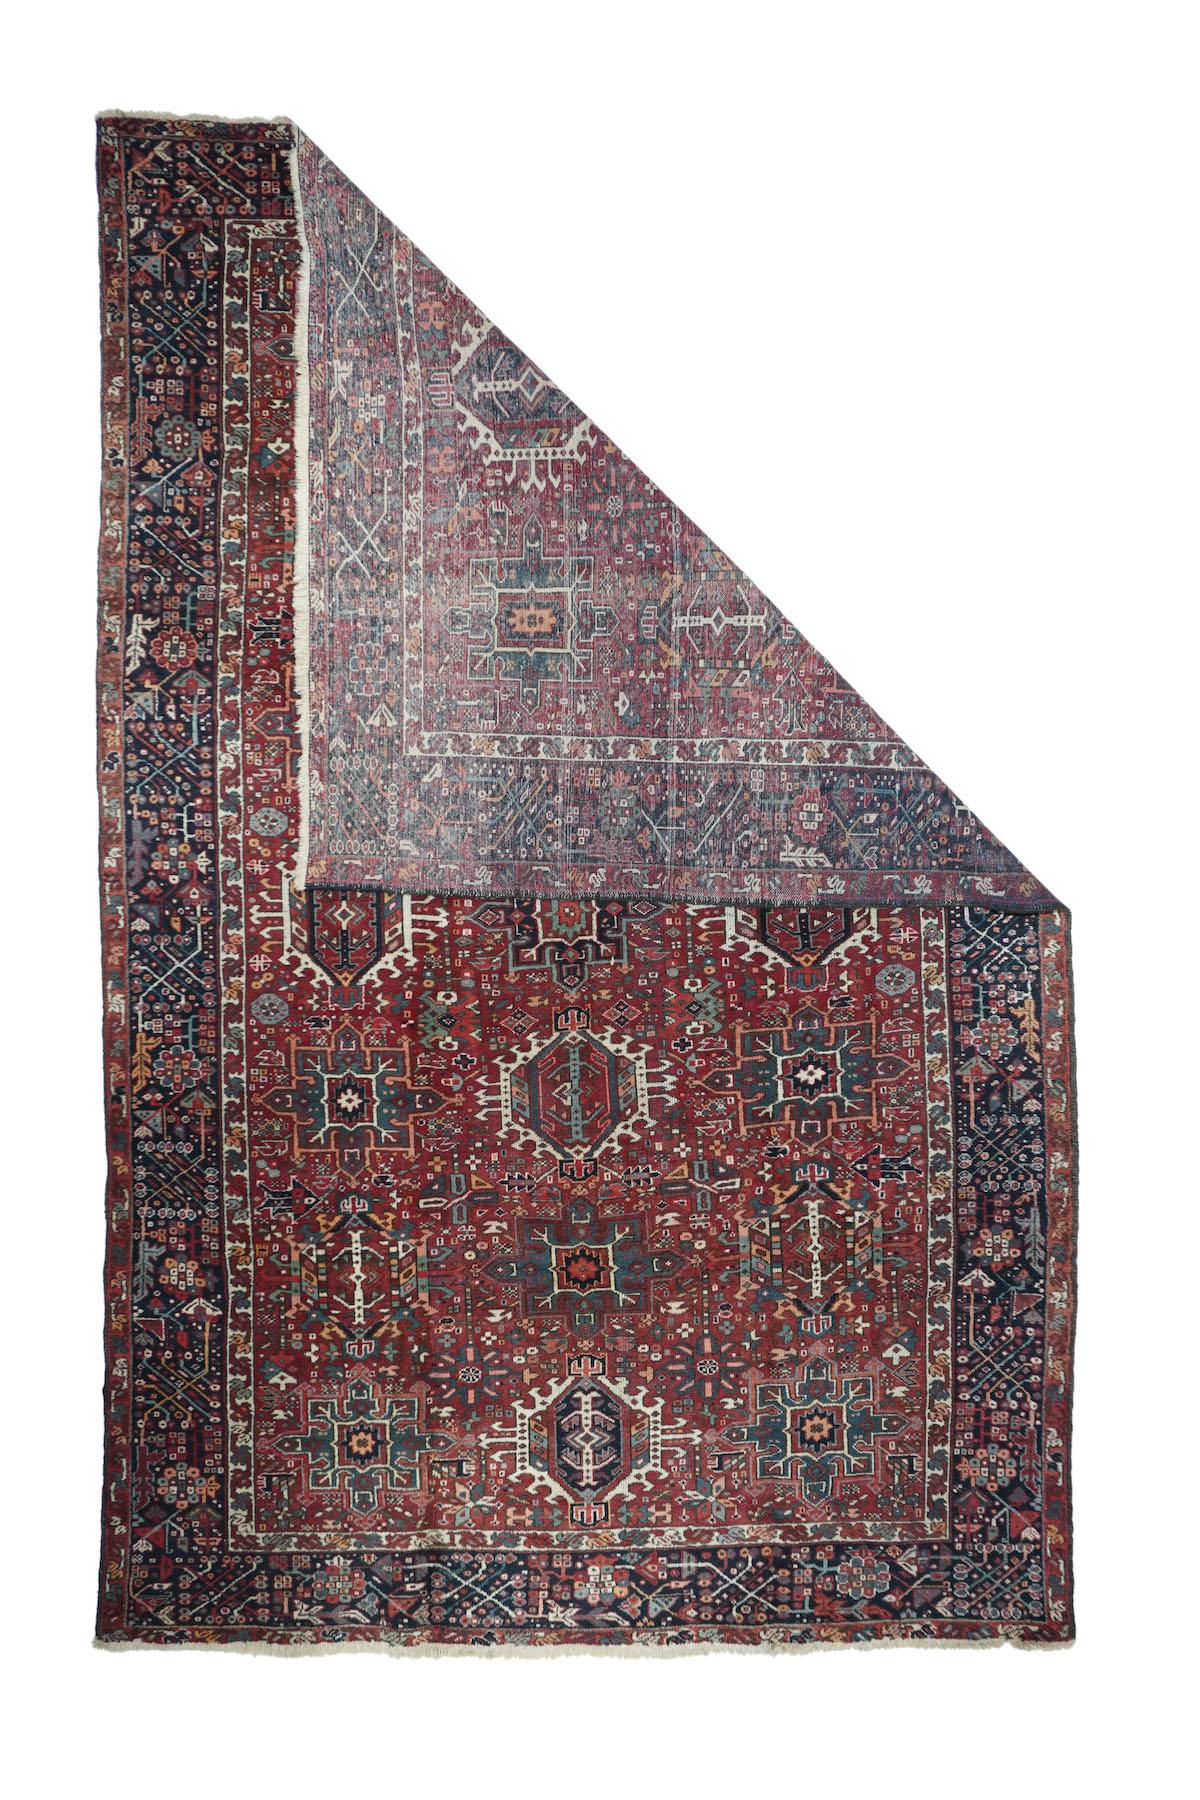 Vintage Heriz Rug 7'5'' x 11'2''. Three columns of characteristic Karaja octogramme and hexagon medallions in green and ecru respectively decorate the red field, while a scatter of smaller, semi-geometric elements closely fills in. Navy border with